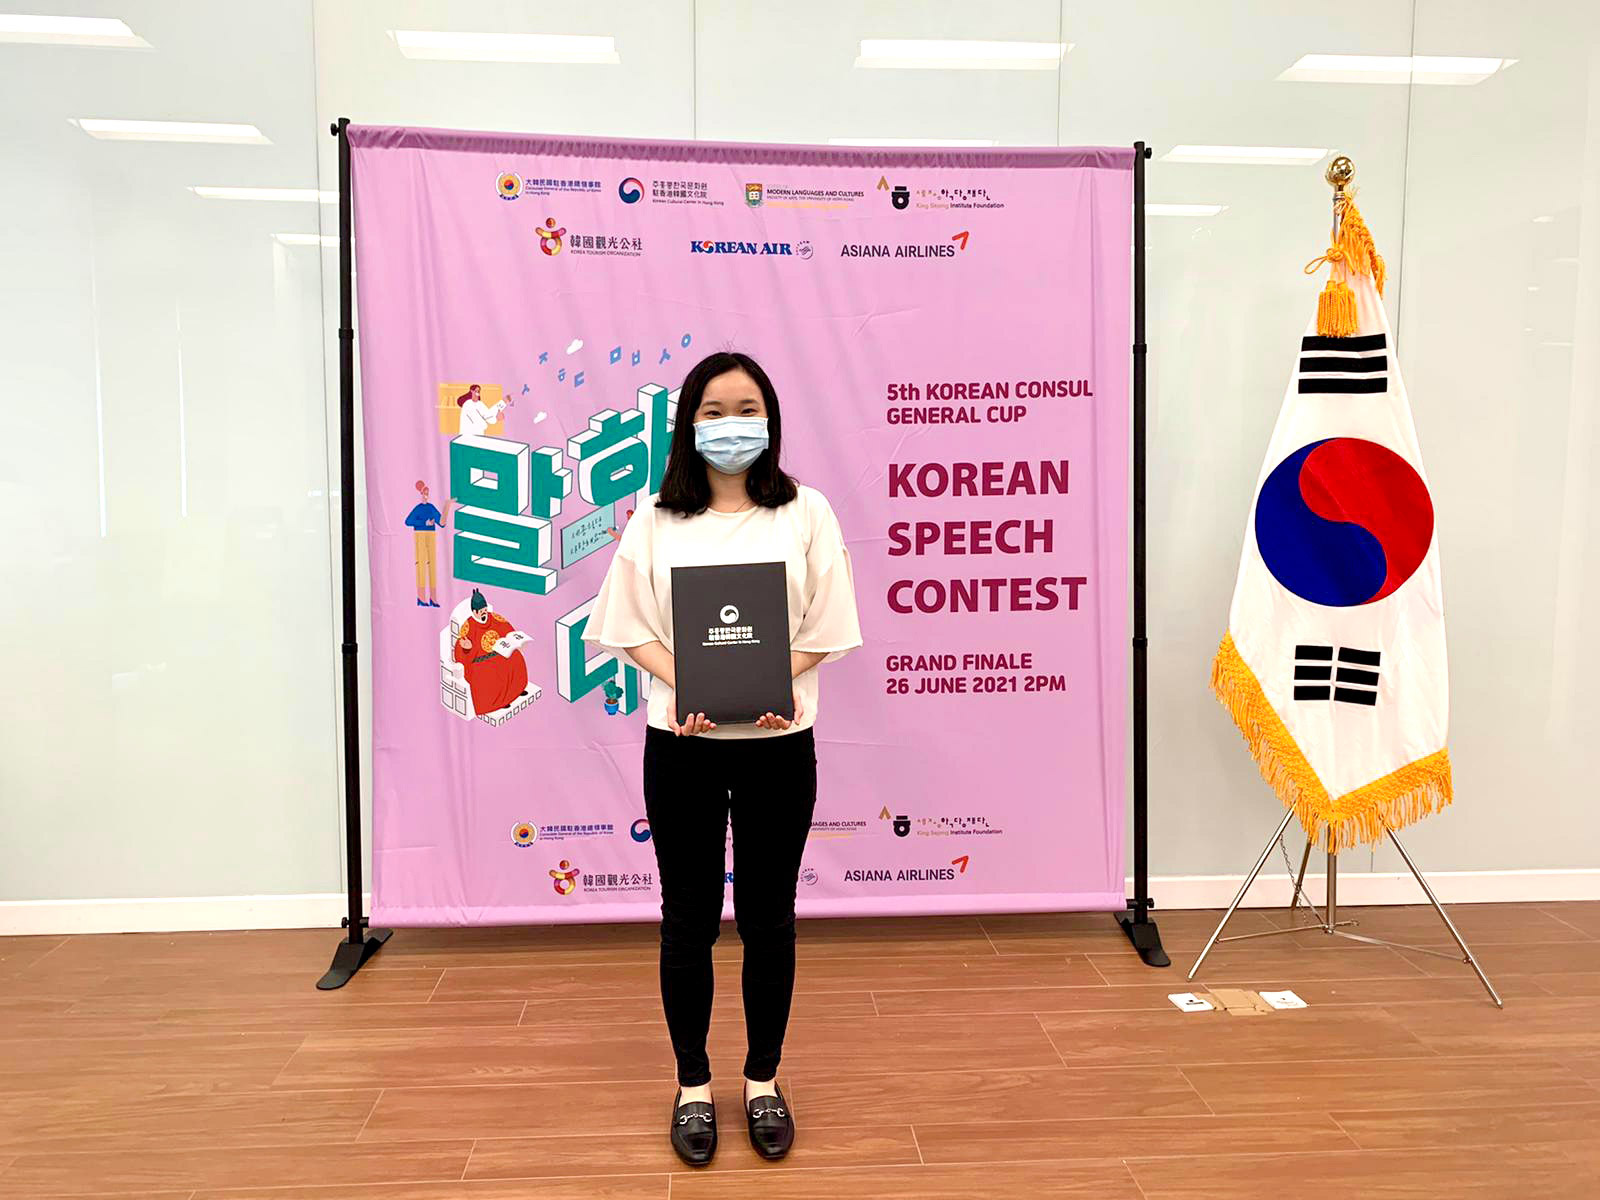 CUSCS Student Wins Second Runner-up at the 5th Korean Consul General Cup Korean Speech Contest